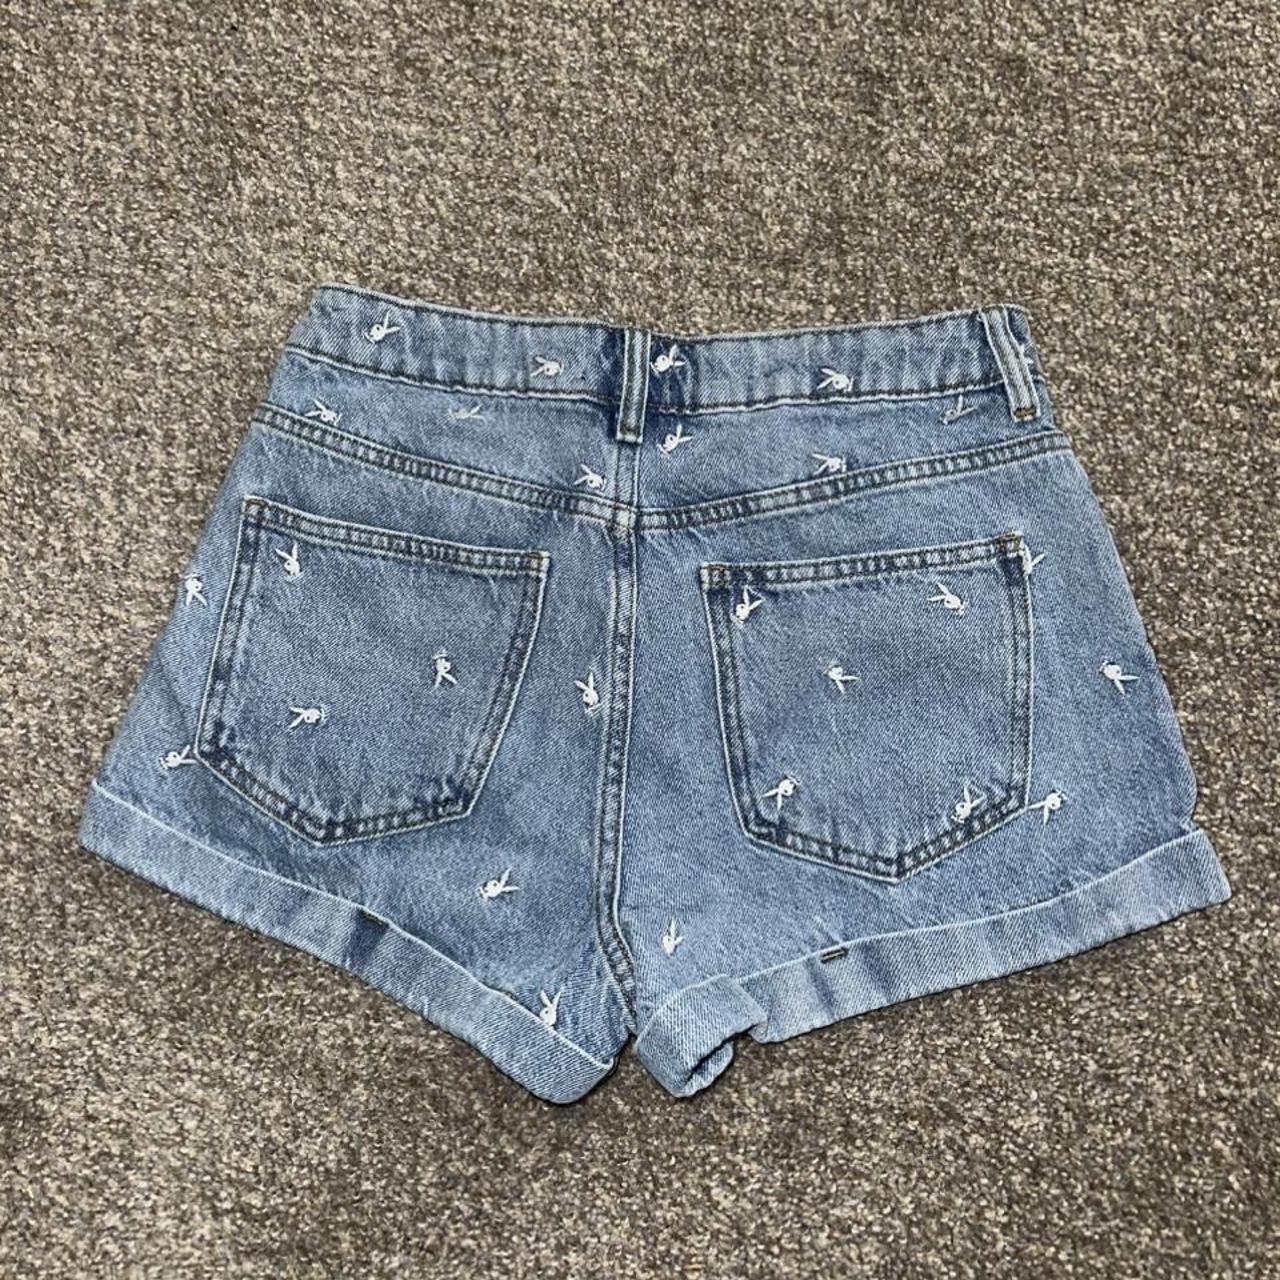 Playboy Women's Blue and White Shorts | Depop